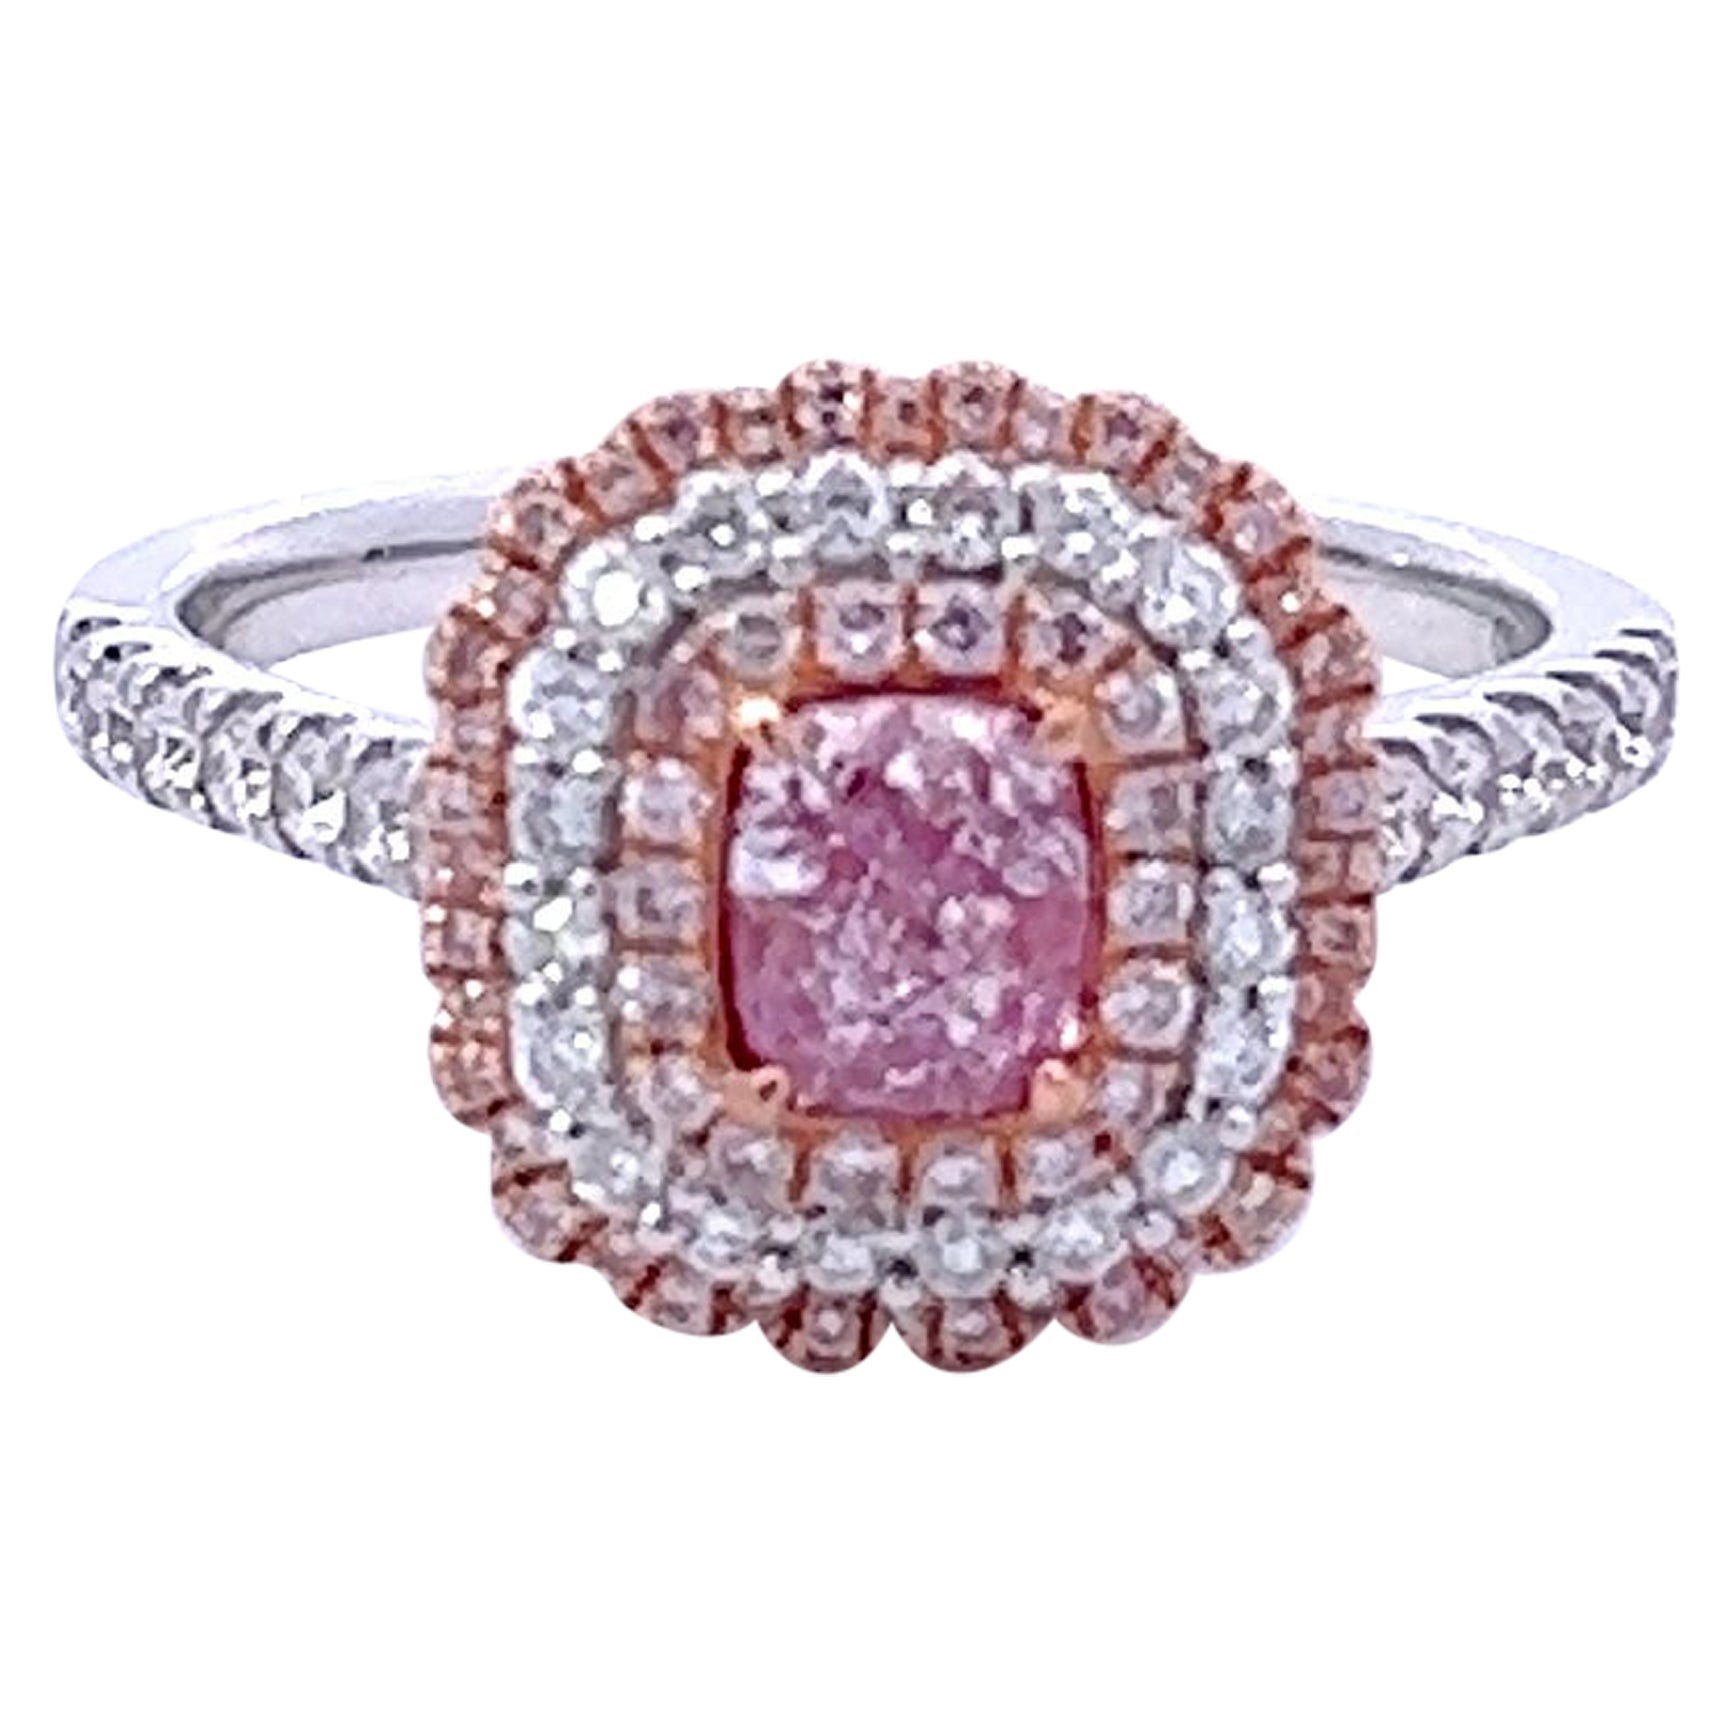 GIA Certified 0.53 Carat Pink Diamond Ring For Sale